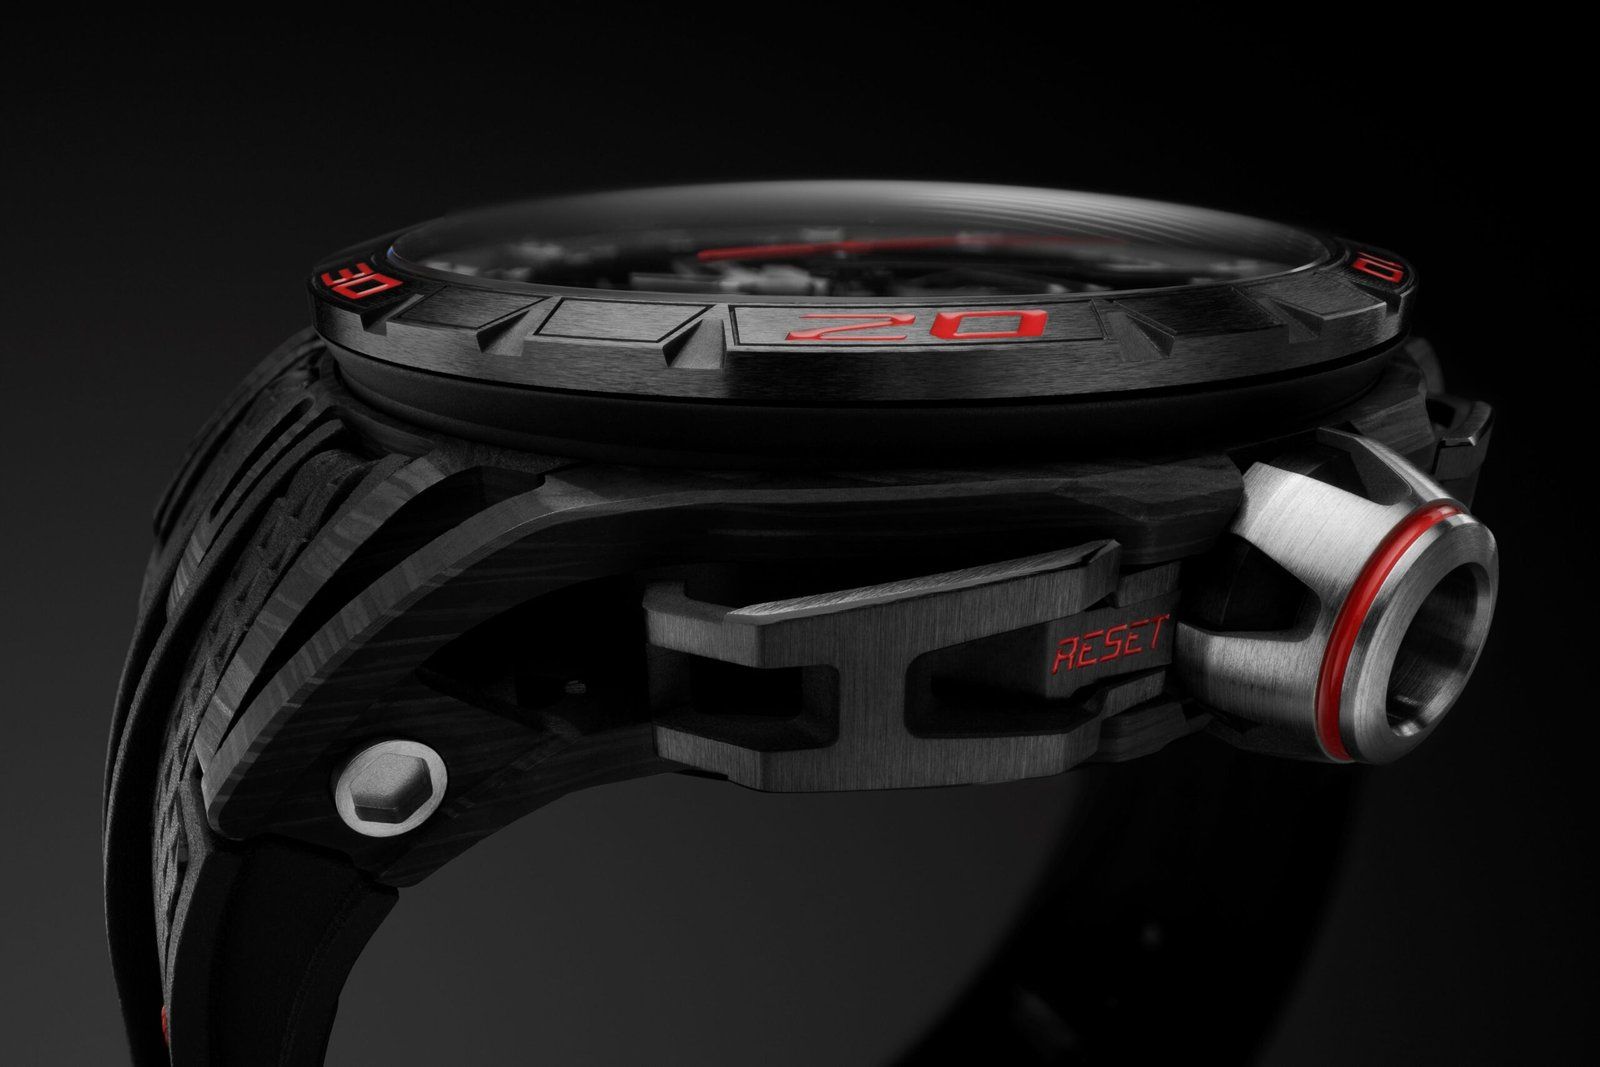 The Excalibur Spider Flyback Chronograph Crown